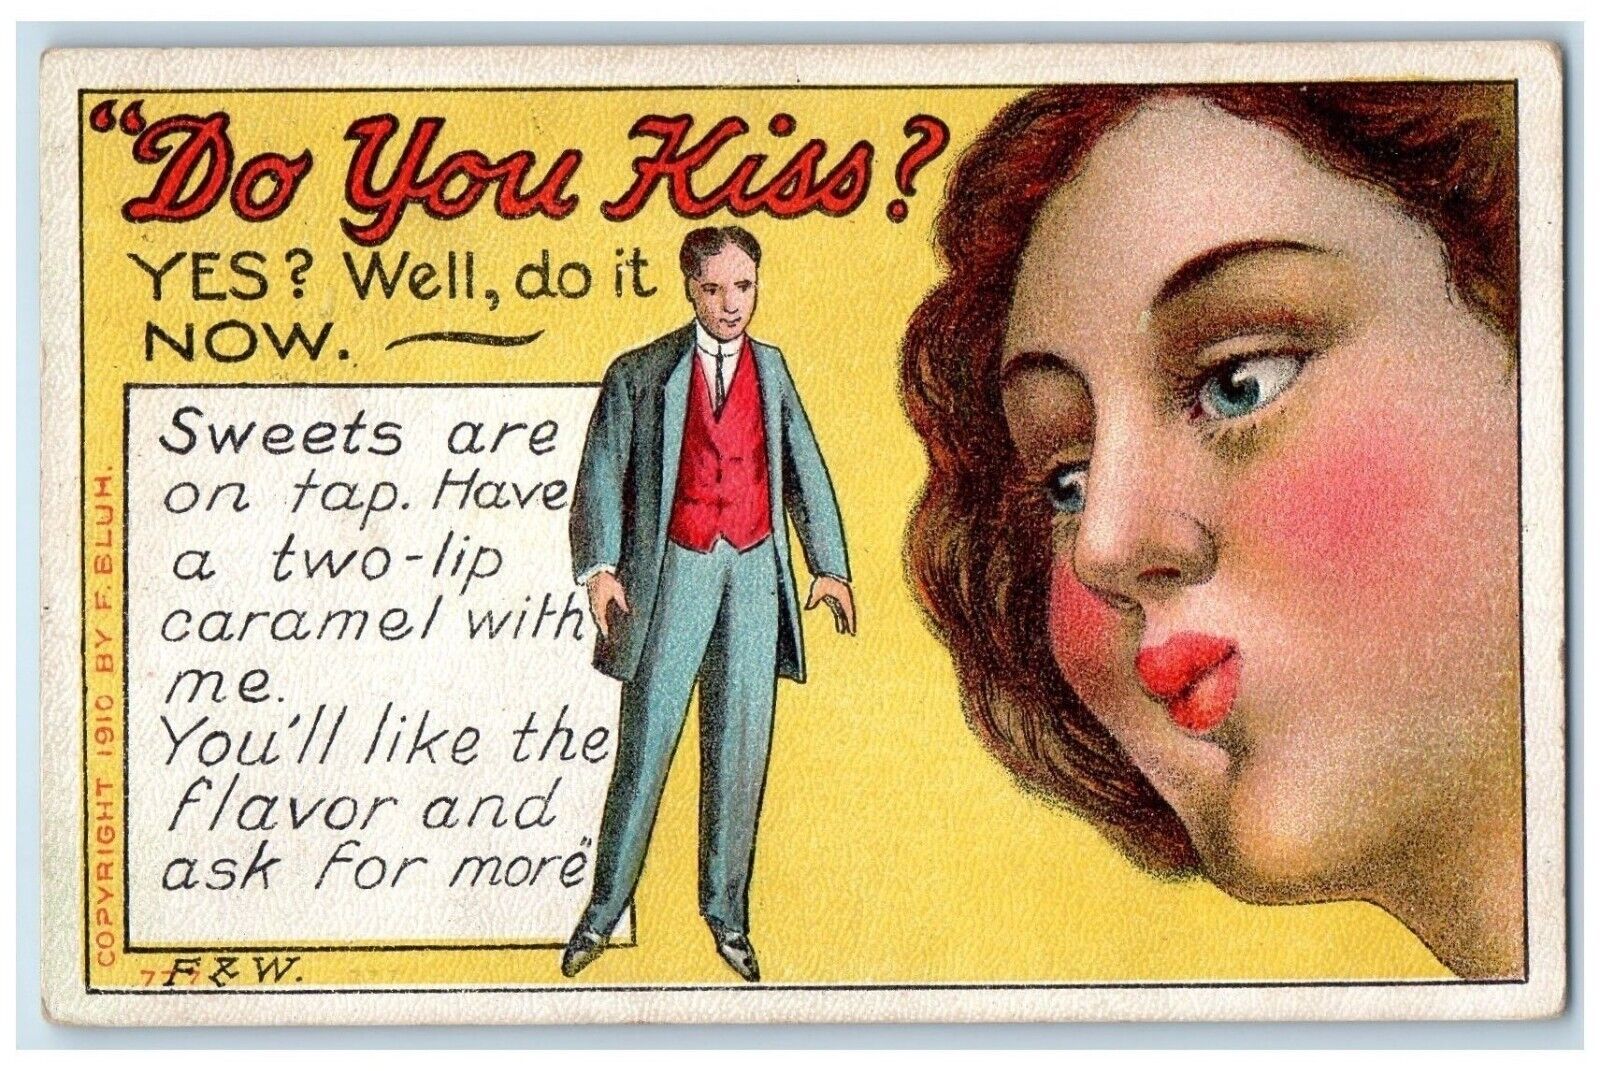 F. Bluh Artist Signed Postcard Pretty Woman Do You Kiss Sweets Are On Tap 1911